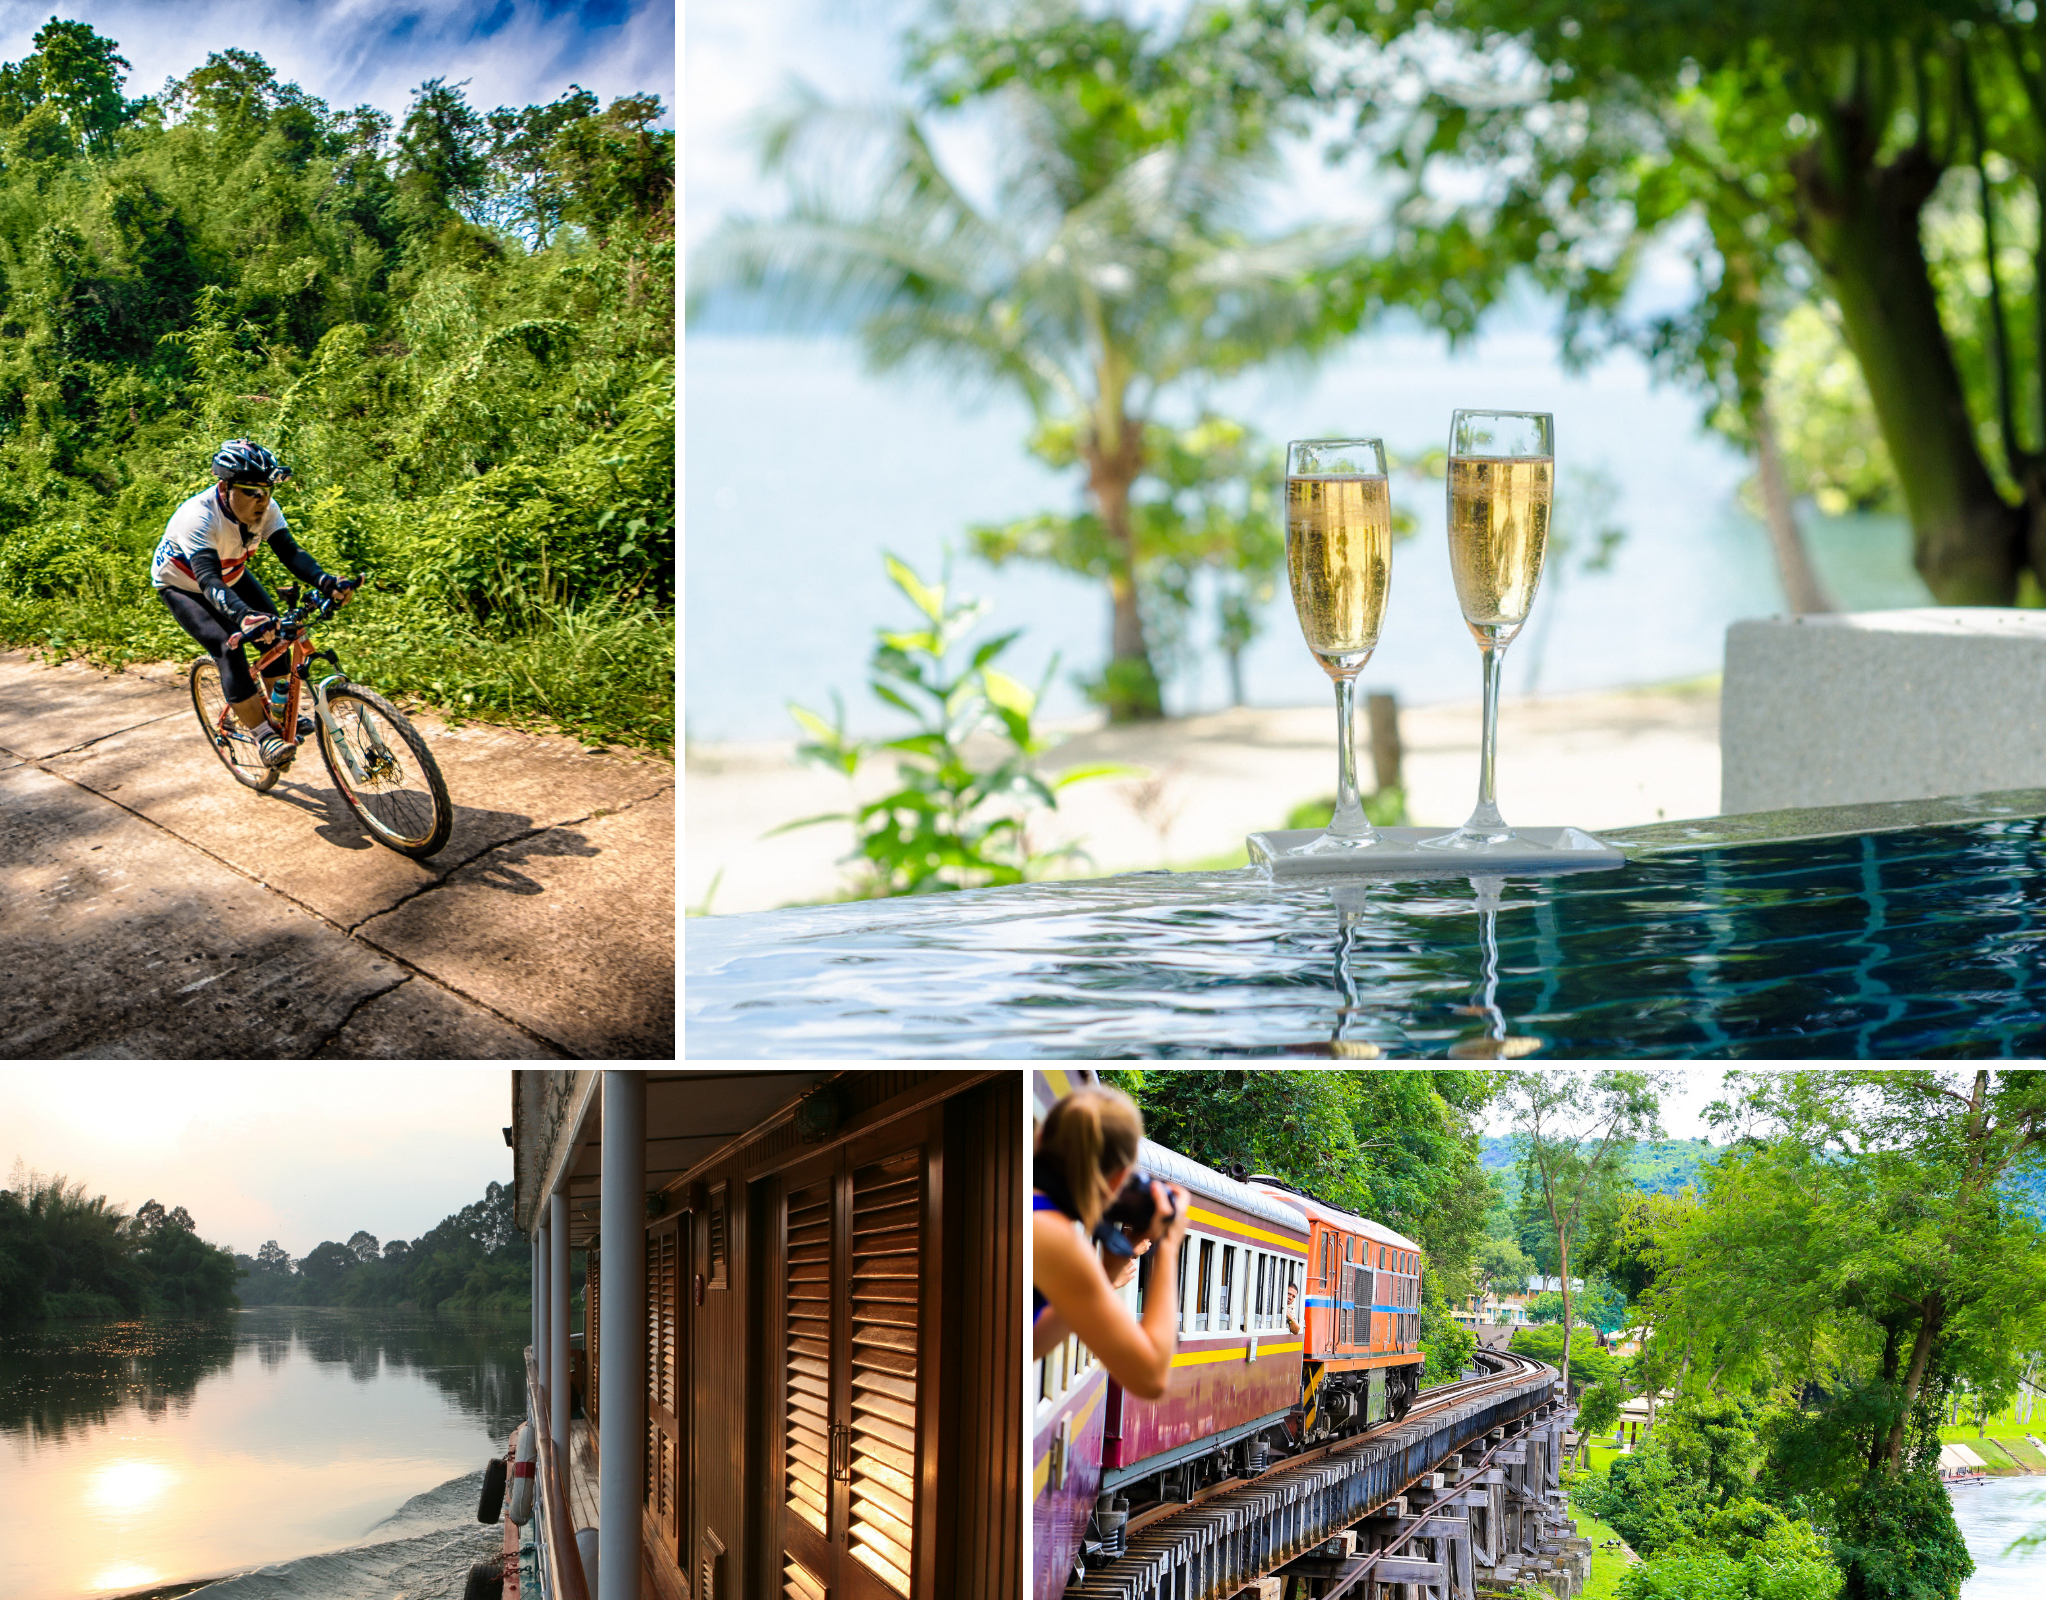 Cyclist riding up hill in greenery, views from a boat, champagne by the beach, and woman taking picture on train